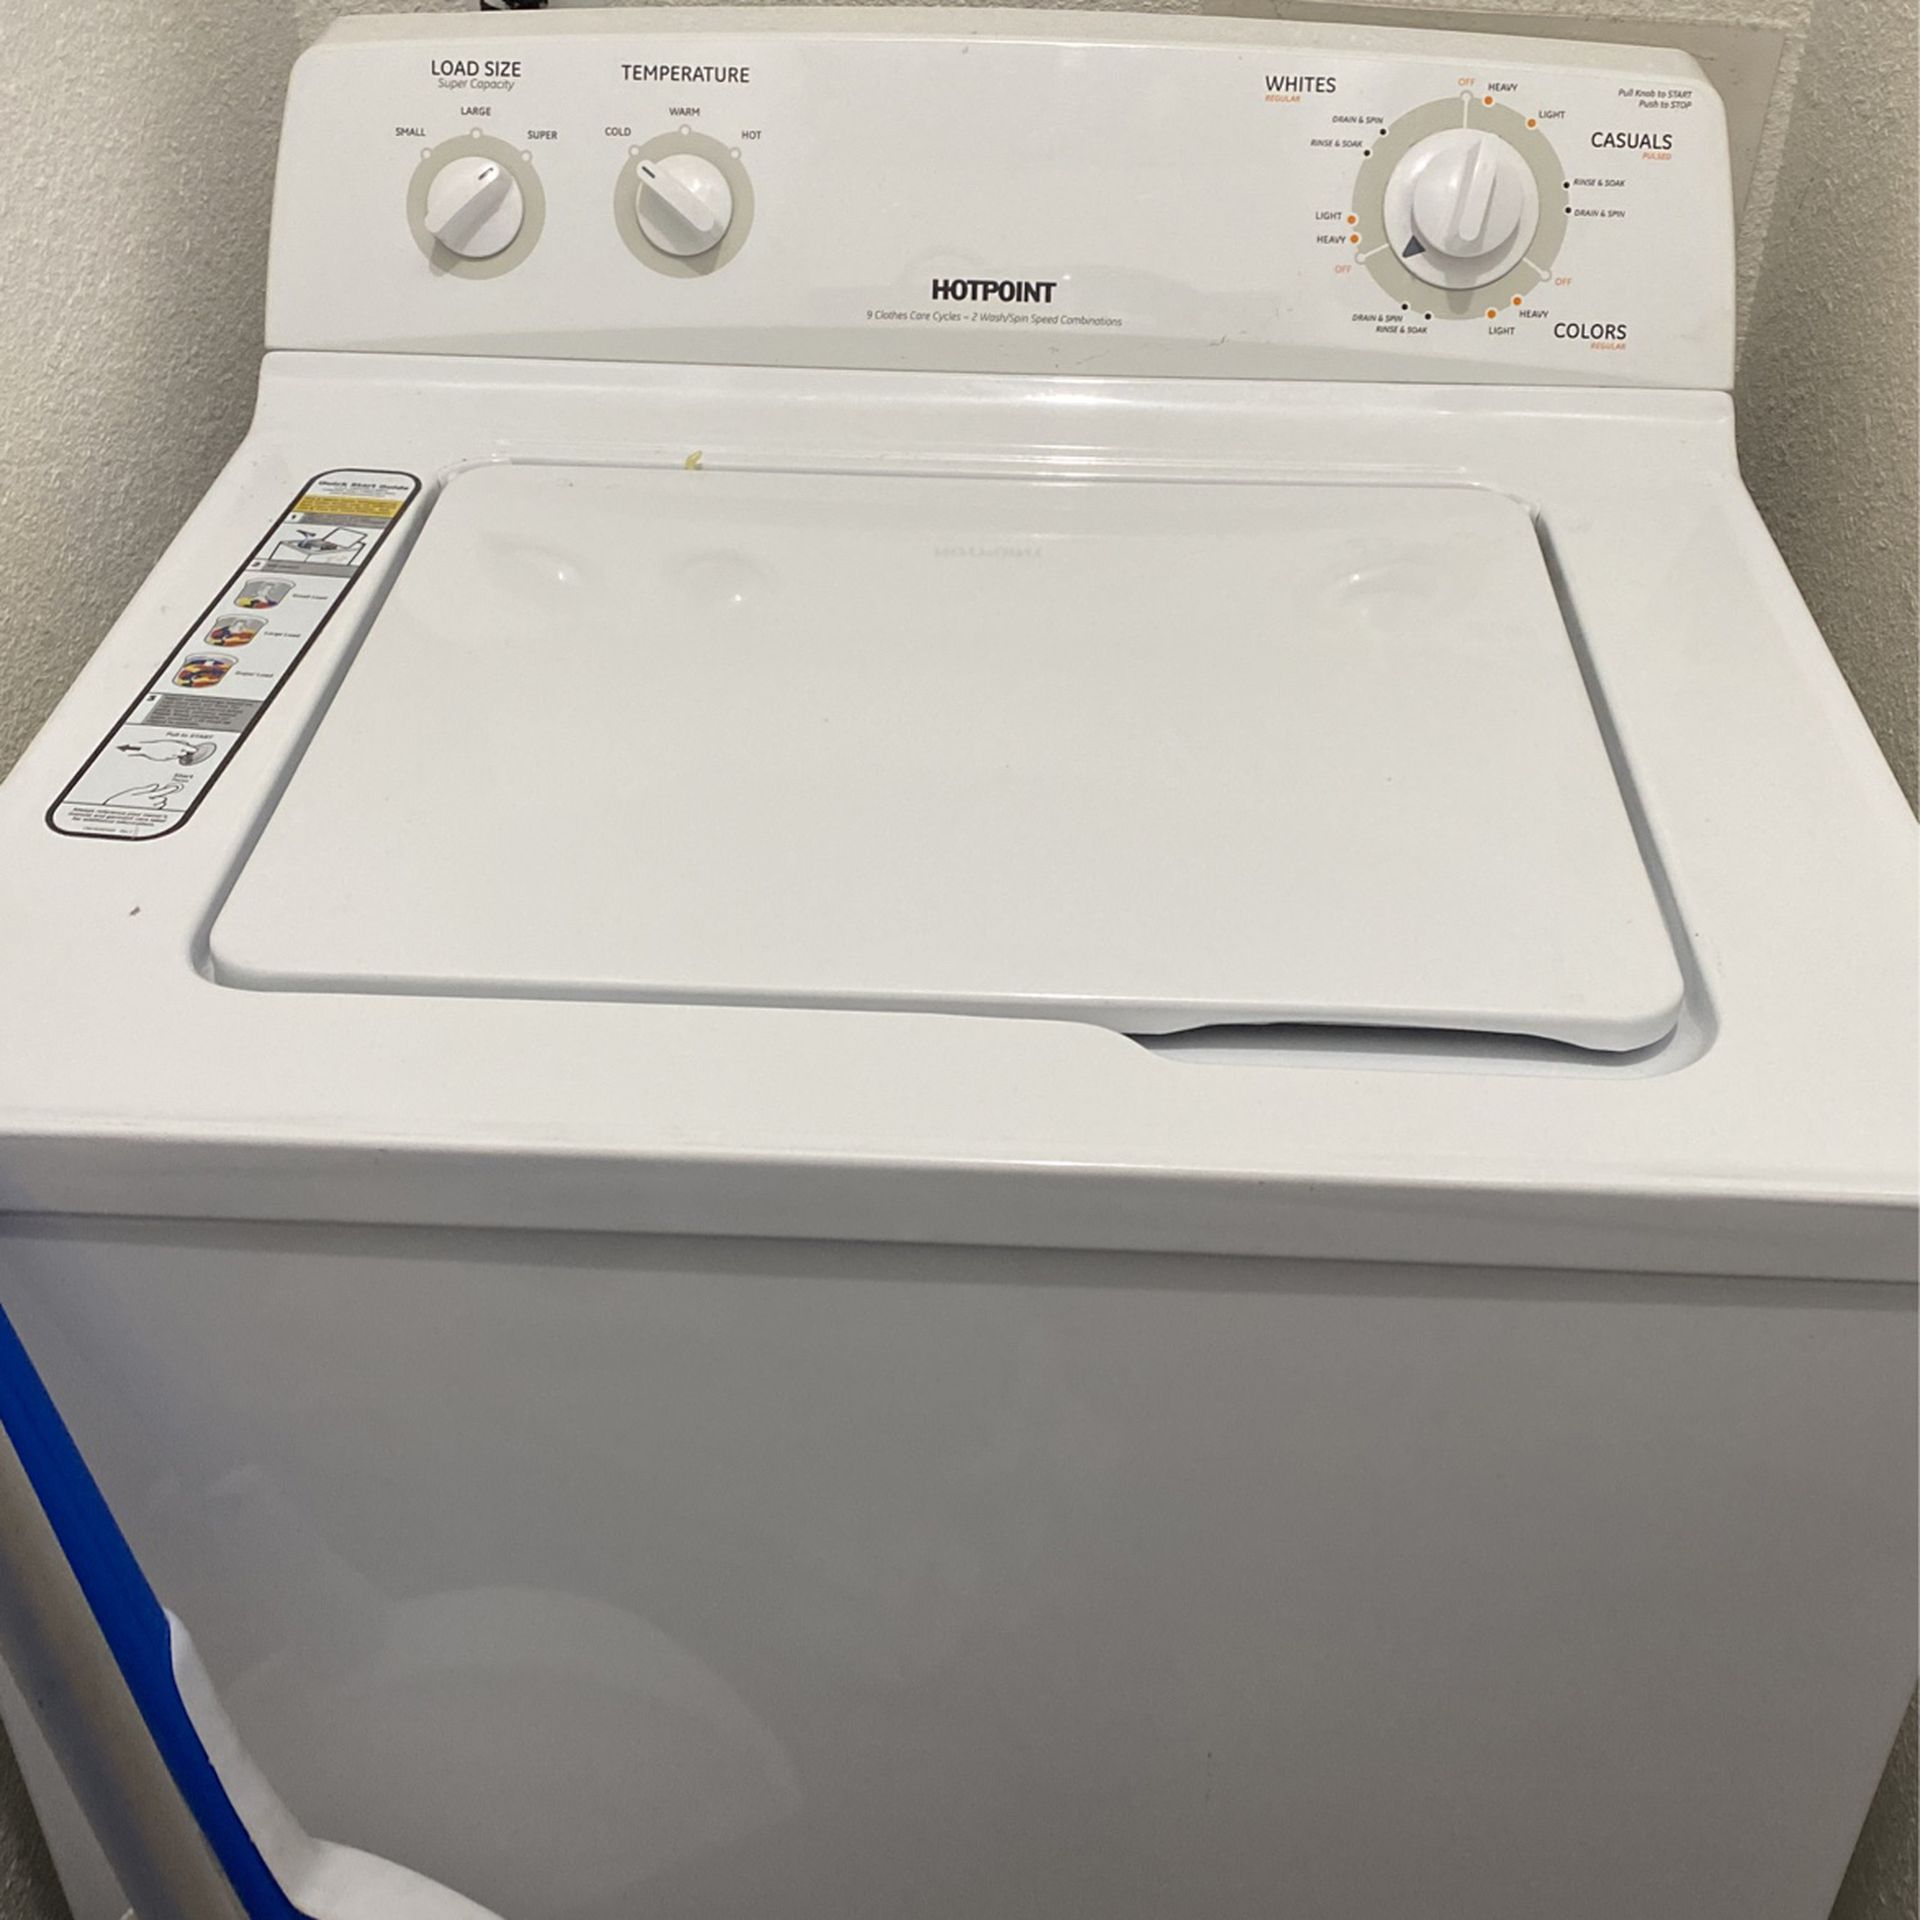 Used Washer Dryer For sale 